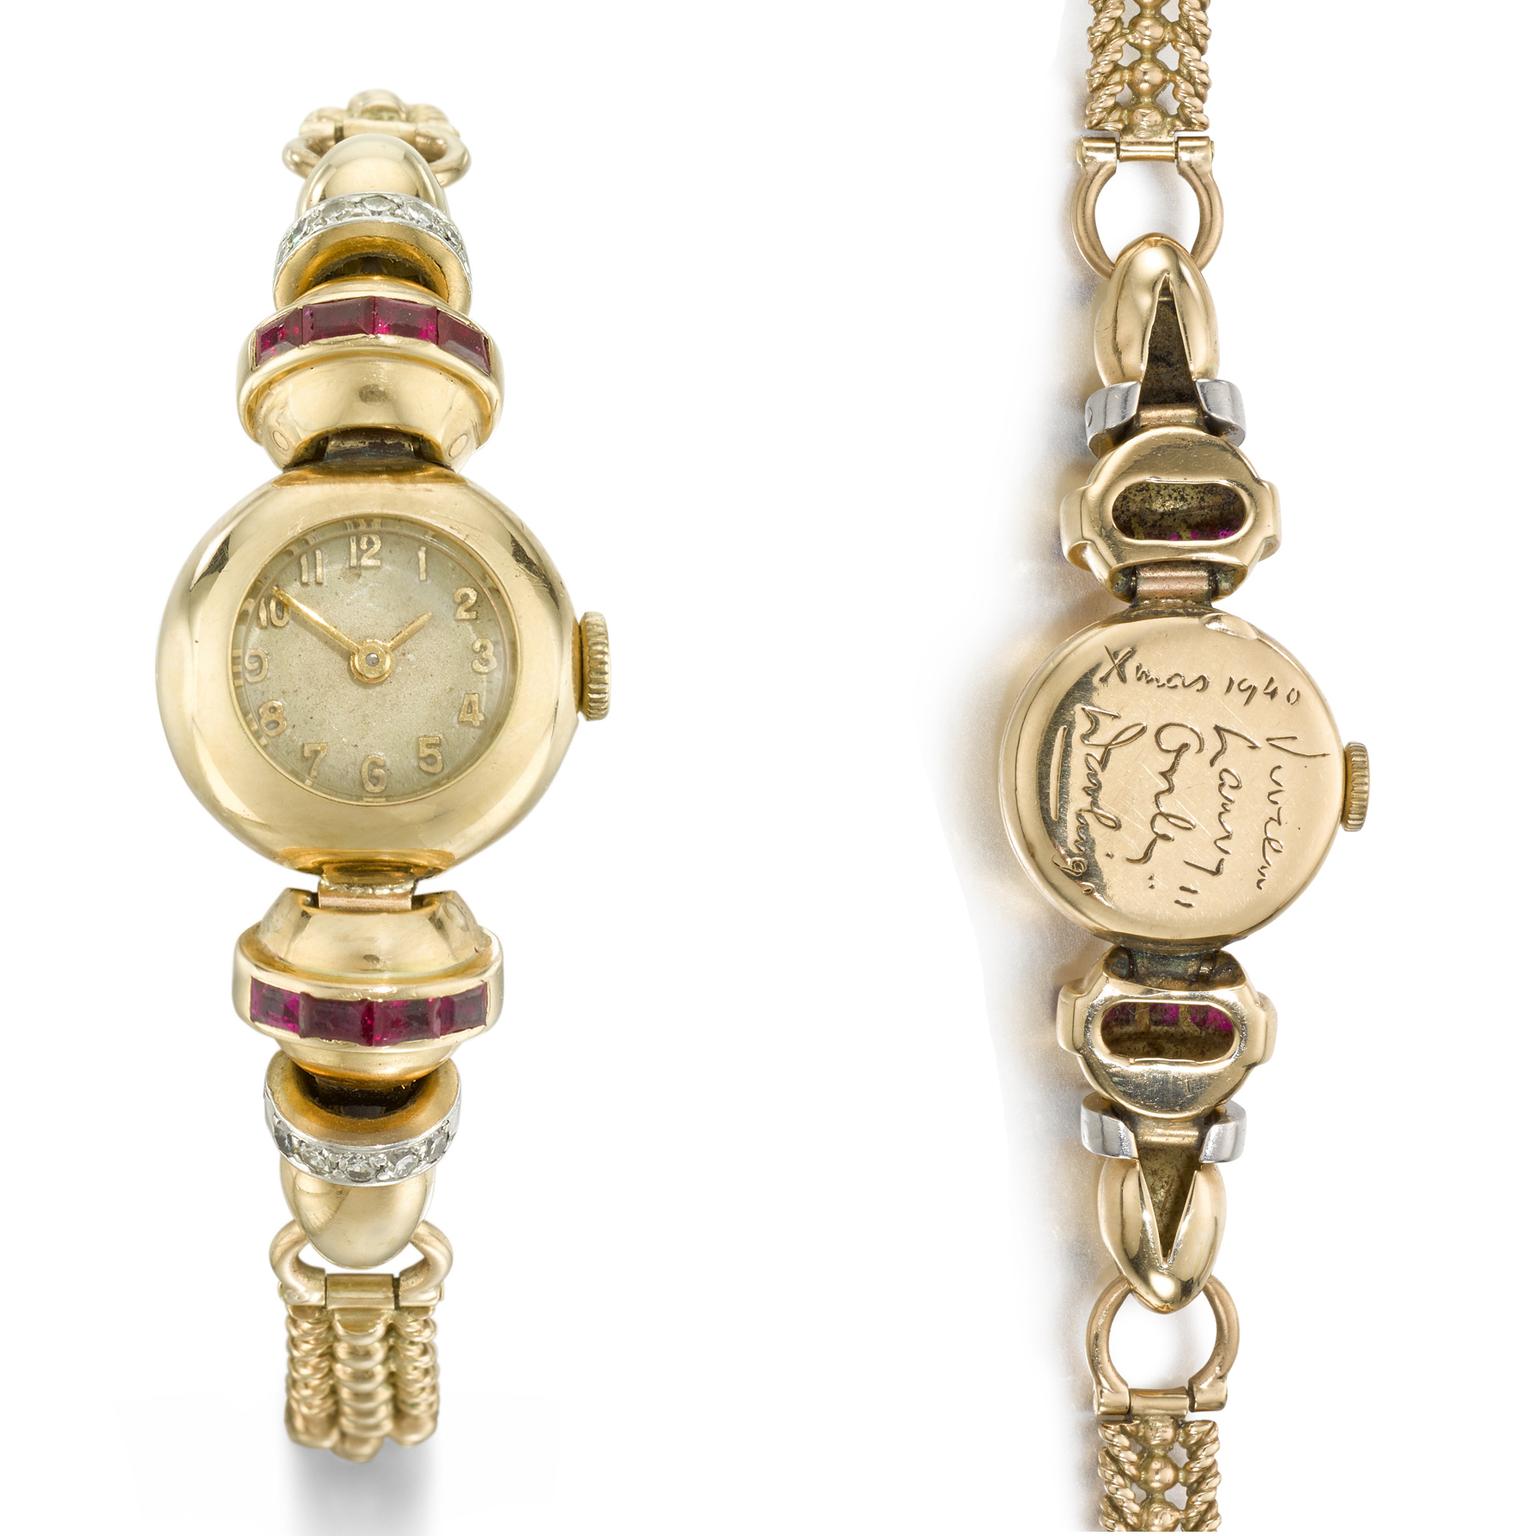 Vivien Leigh's watch given to her by Laurence Olivier